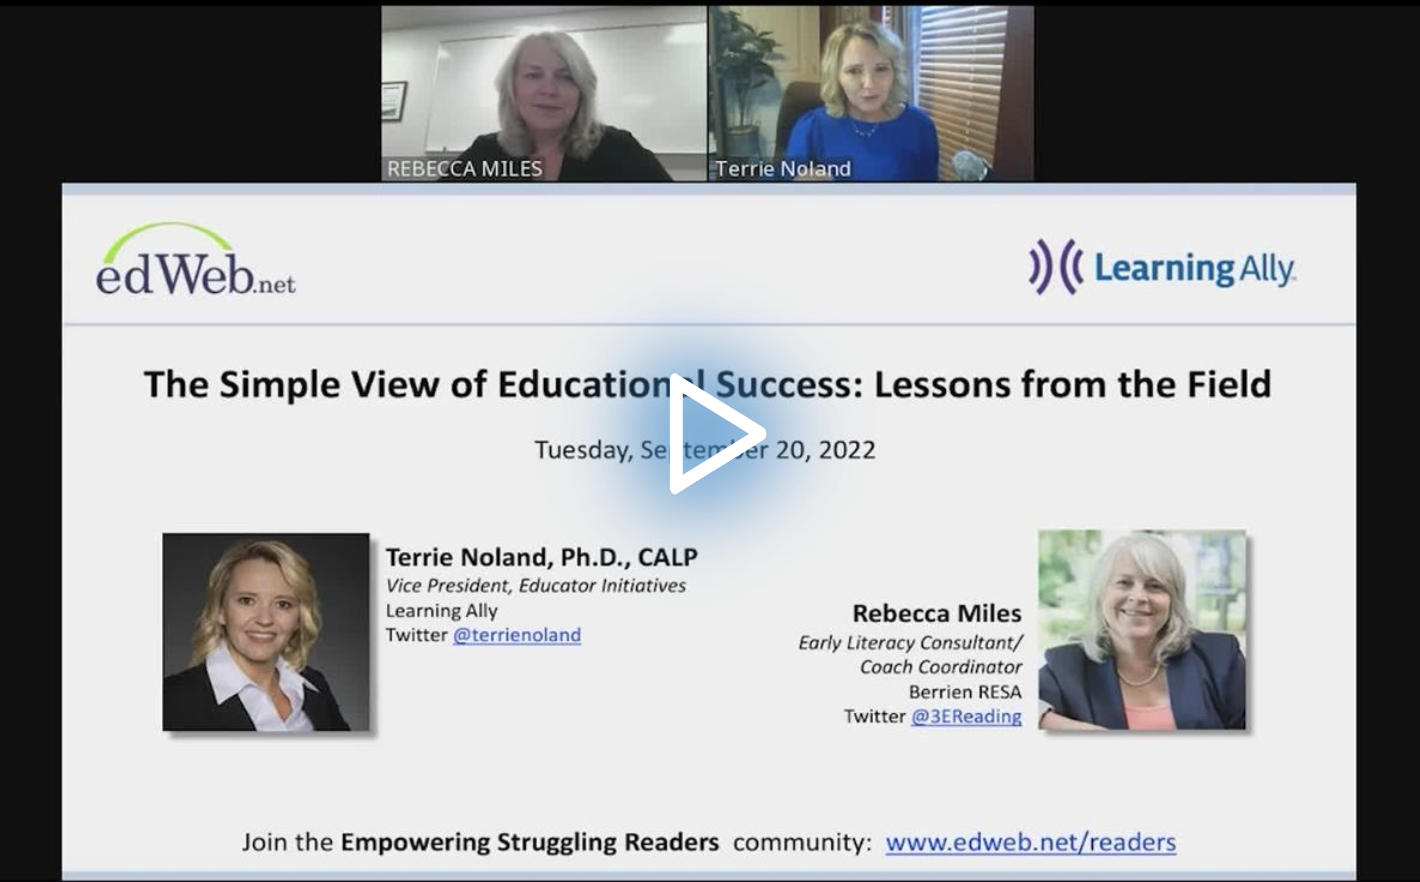 The Simple View of Educational Success: Lessons from the Field edLeader Panel recording link